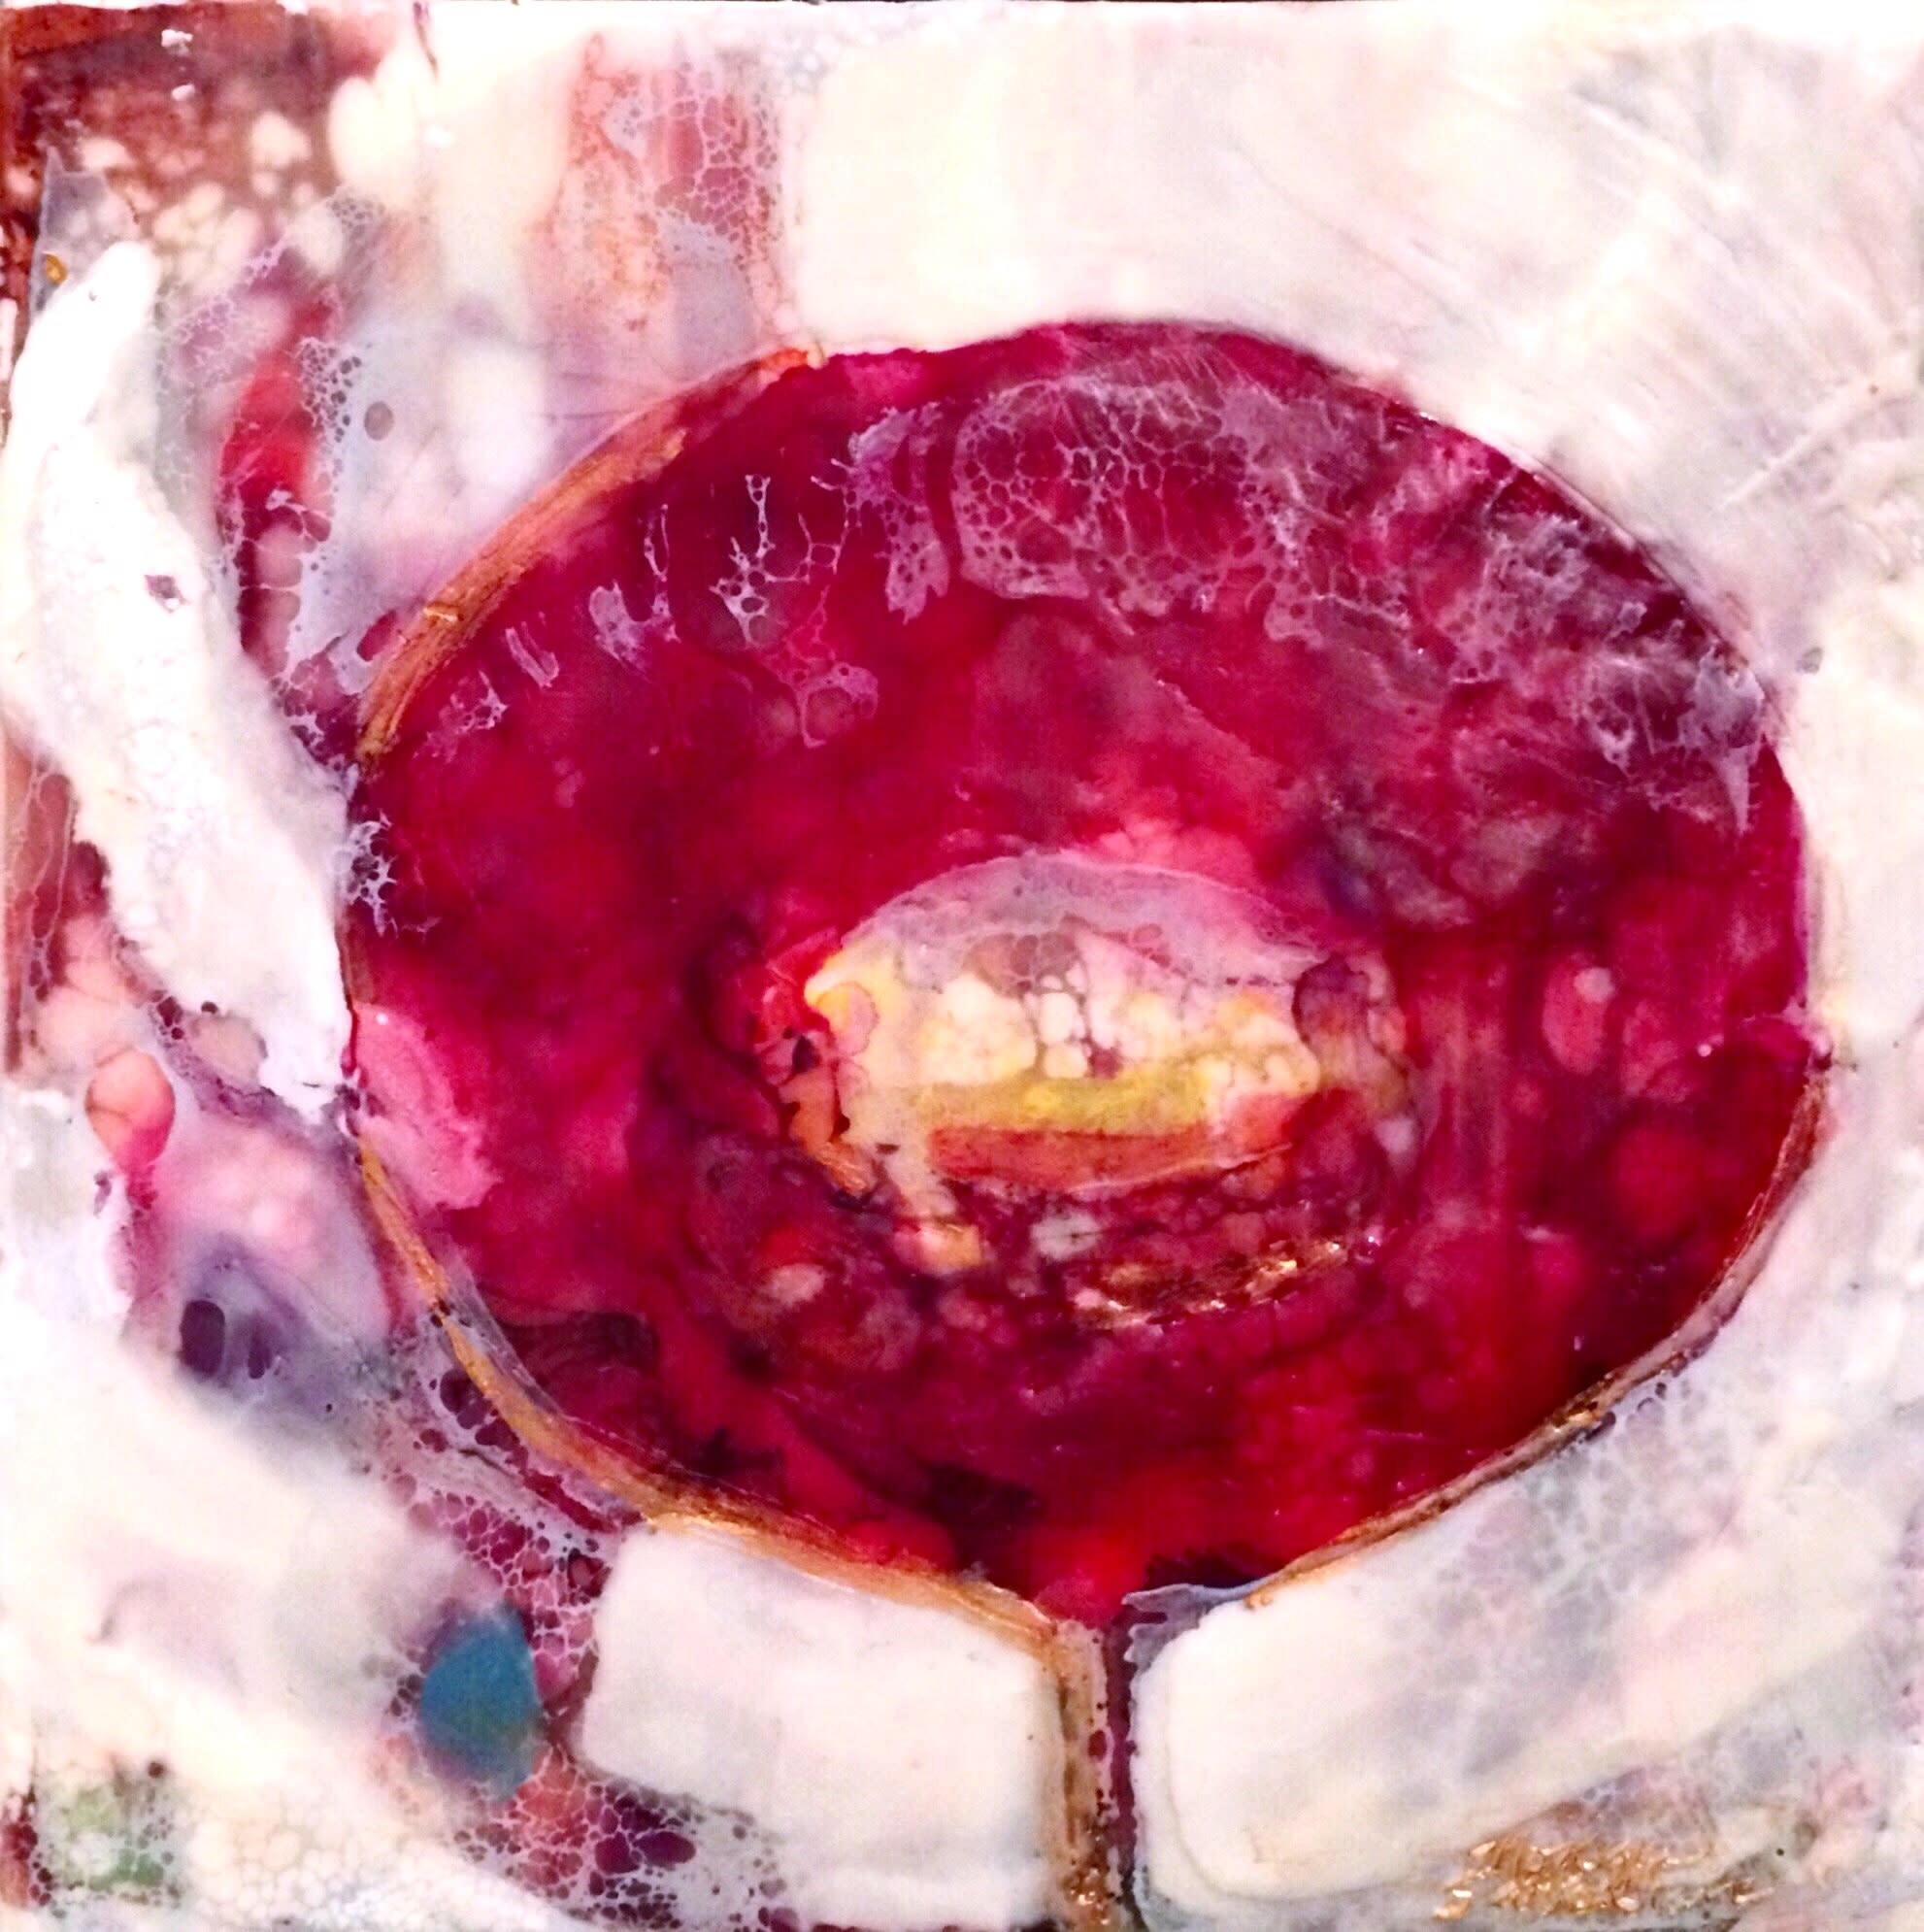 Love conquers 8 front encaustic wax and mixed media on panel 6x6jpg qlngvm